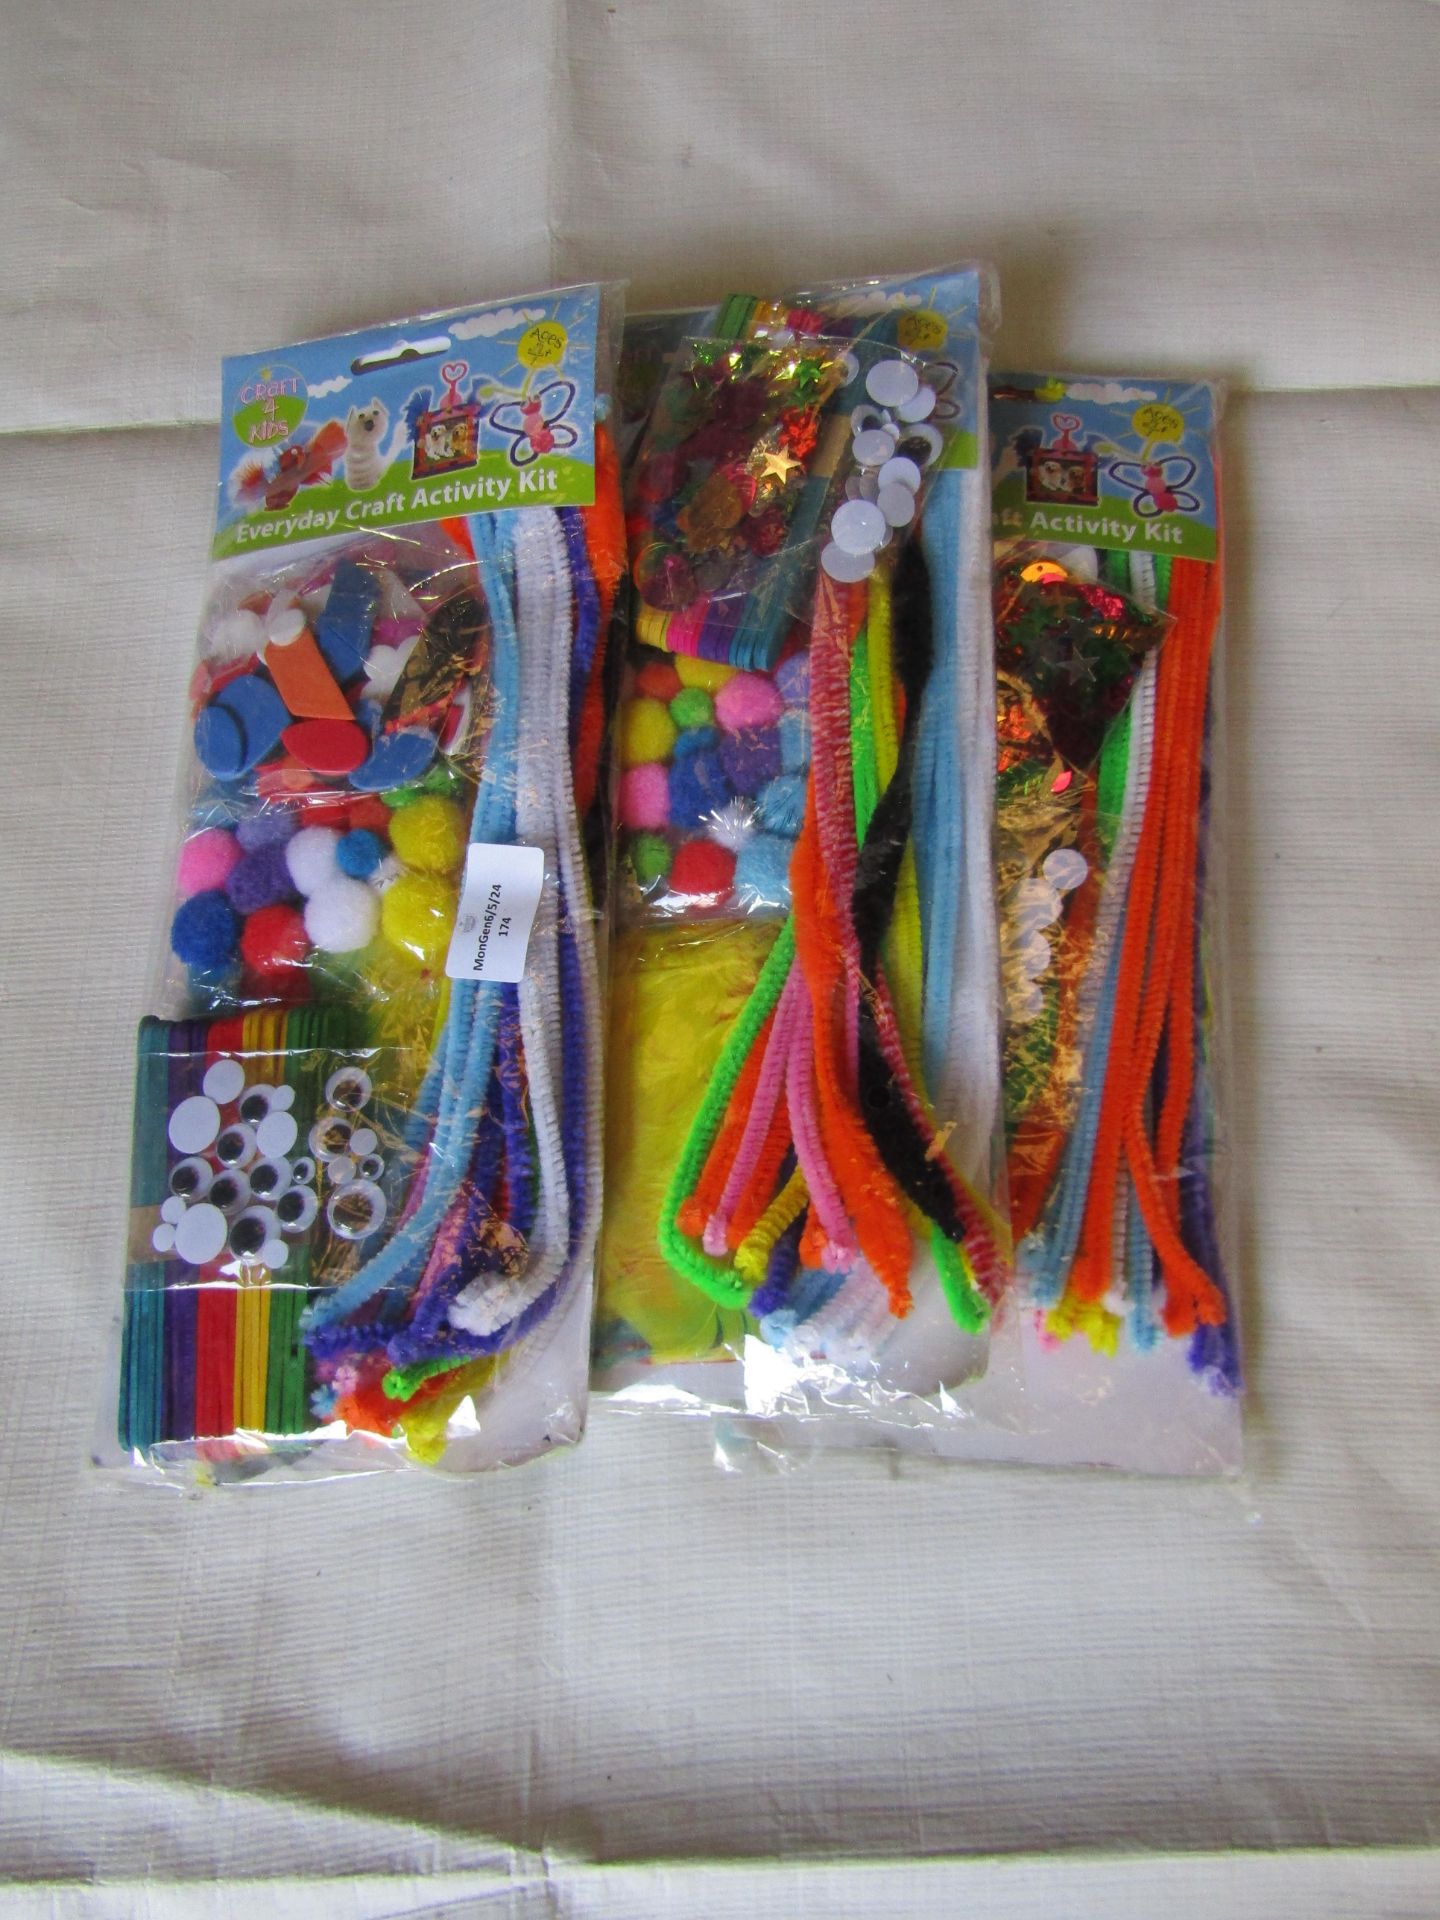 3x Craft 4 Kids Everyday Craft Activity Kit - All Unused & Packaged.